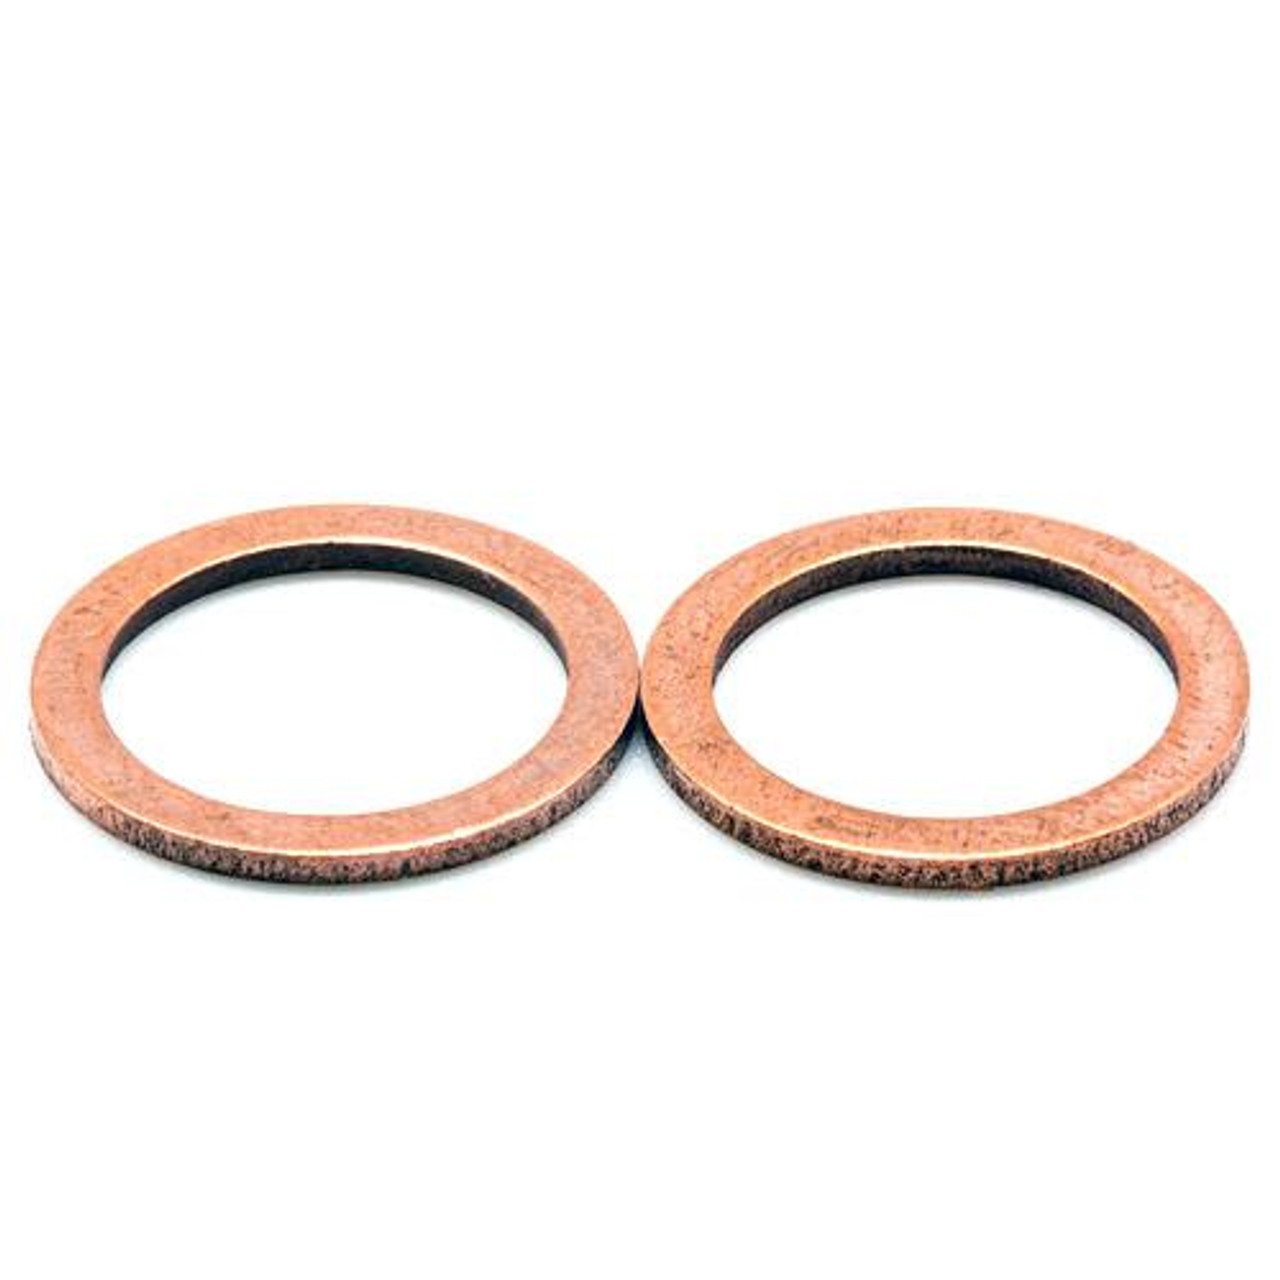 BLOX RACING OUTLET CRUSHER WASHERS - 2-PACK